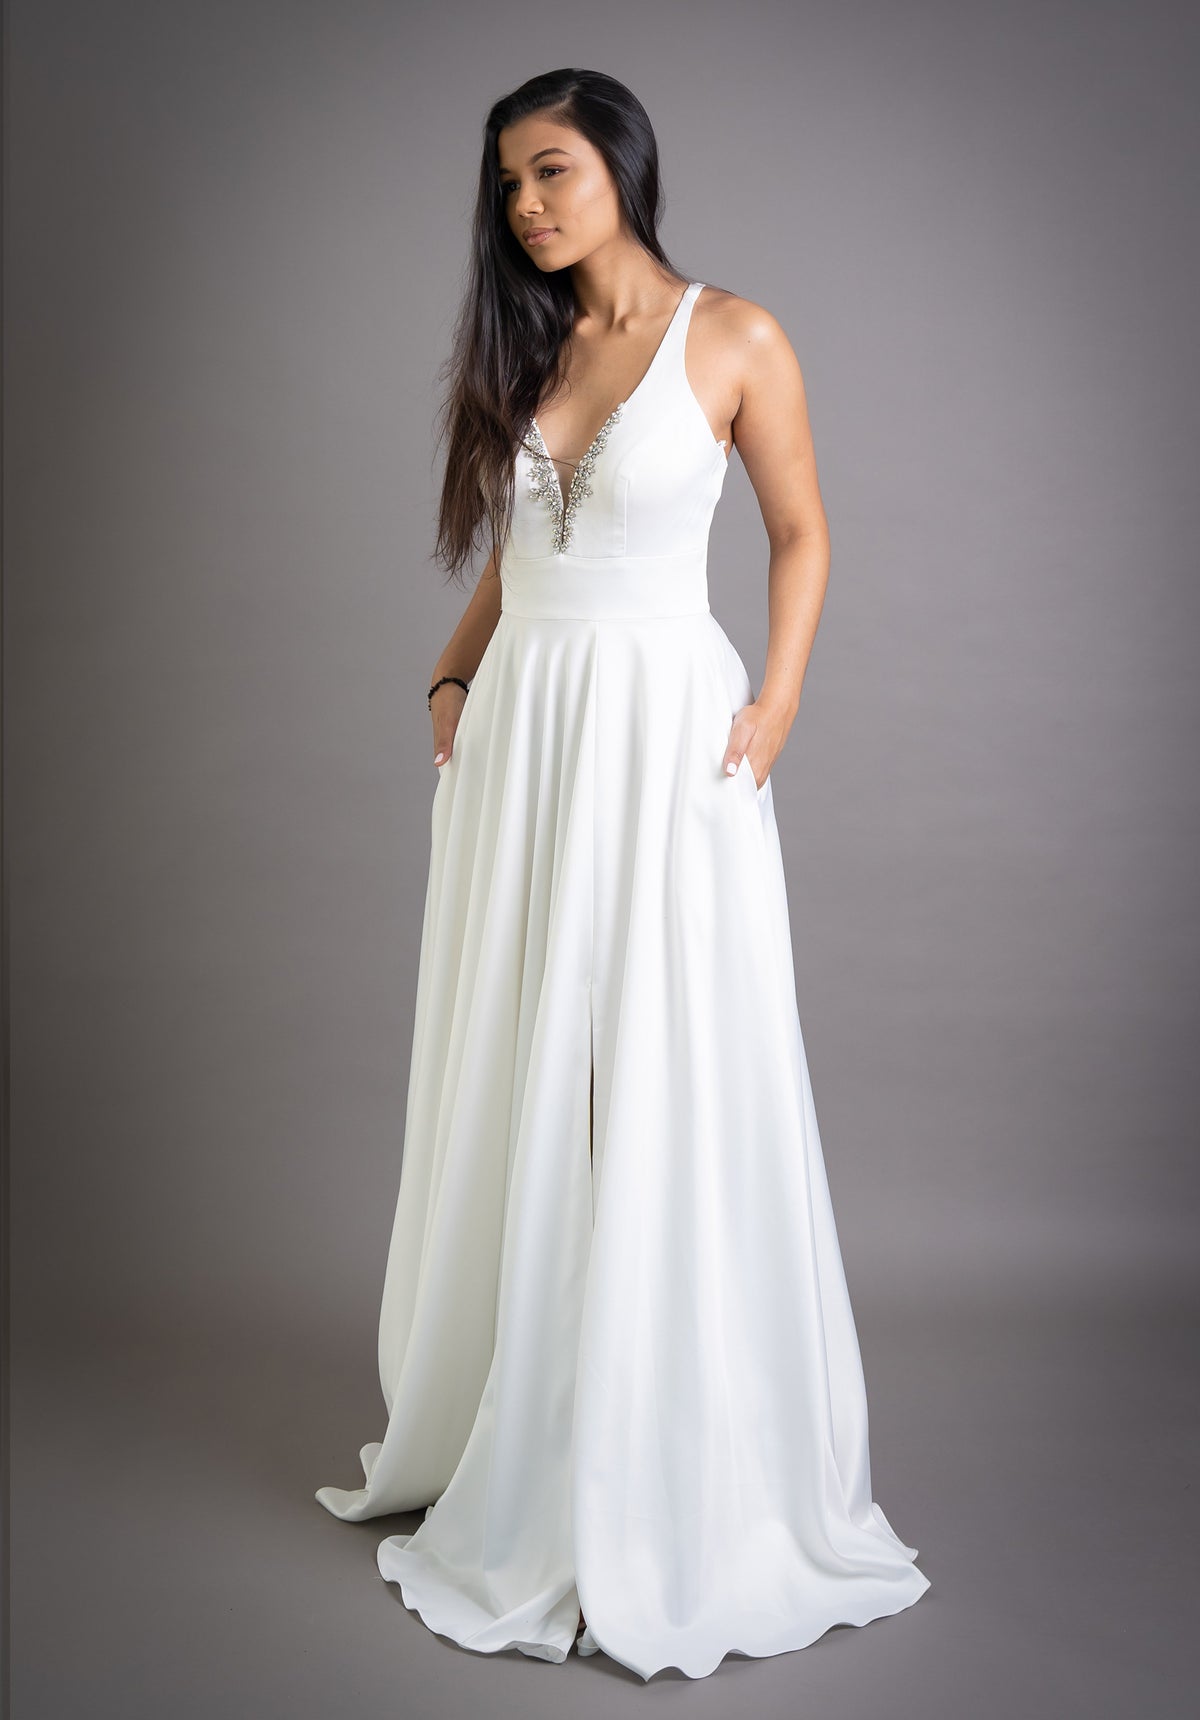 White with Silver Beading Open-Back Evening Dress